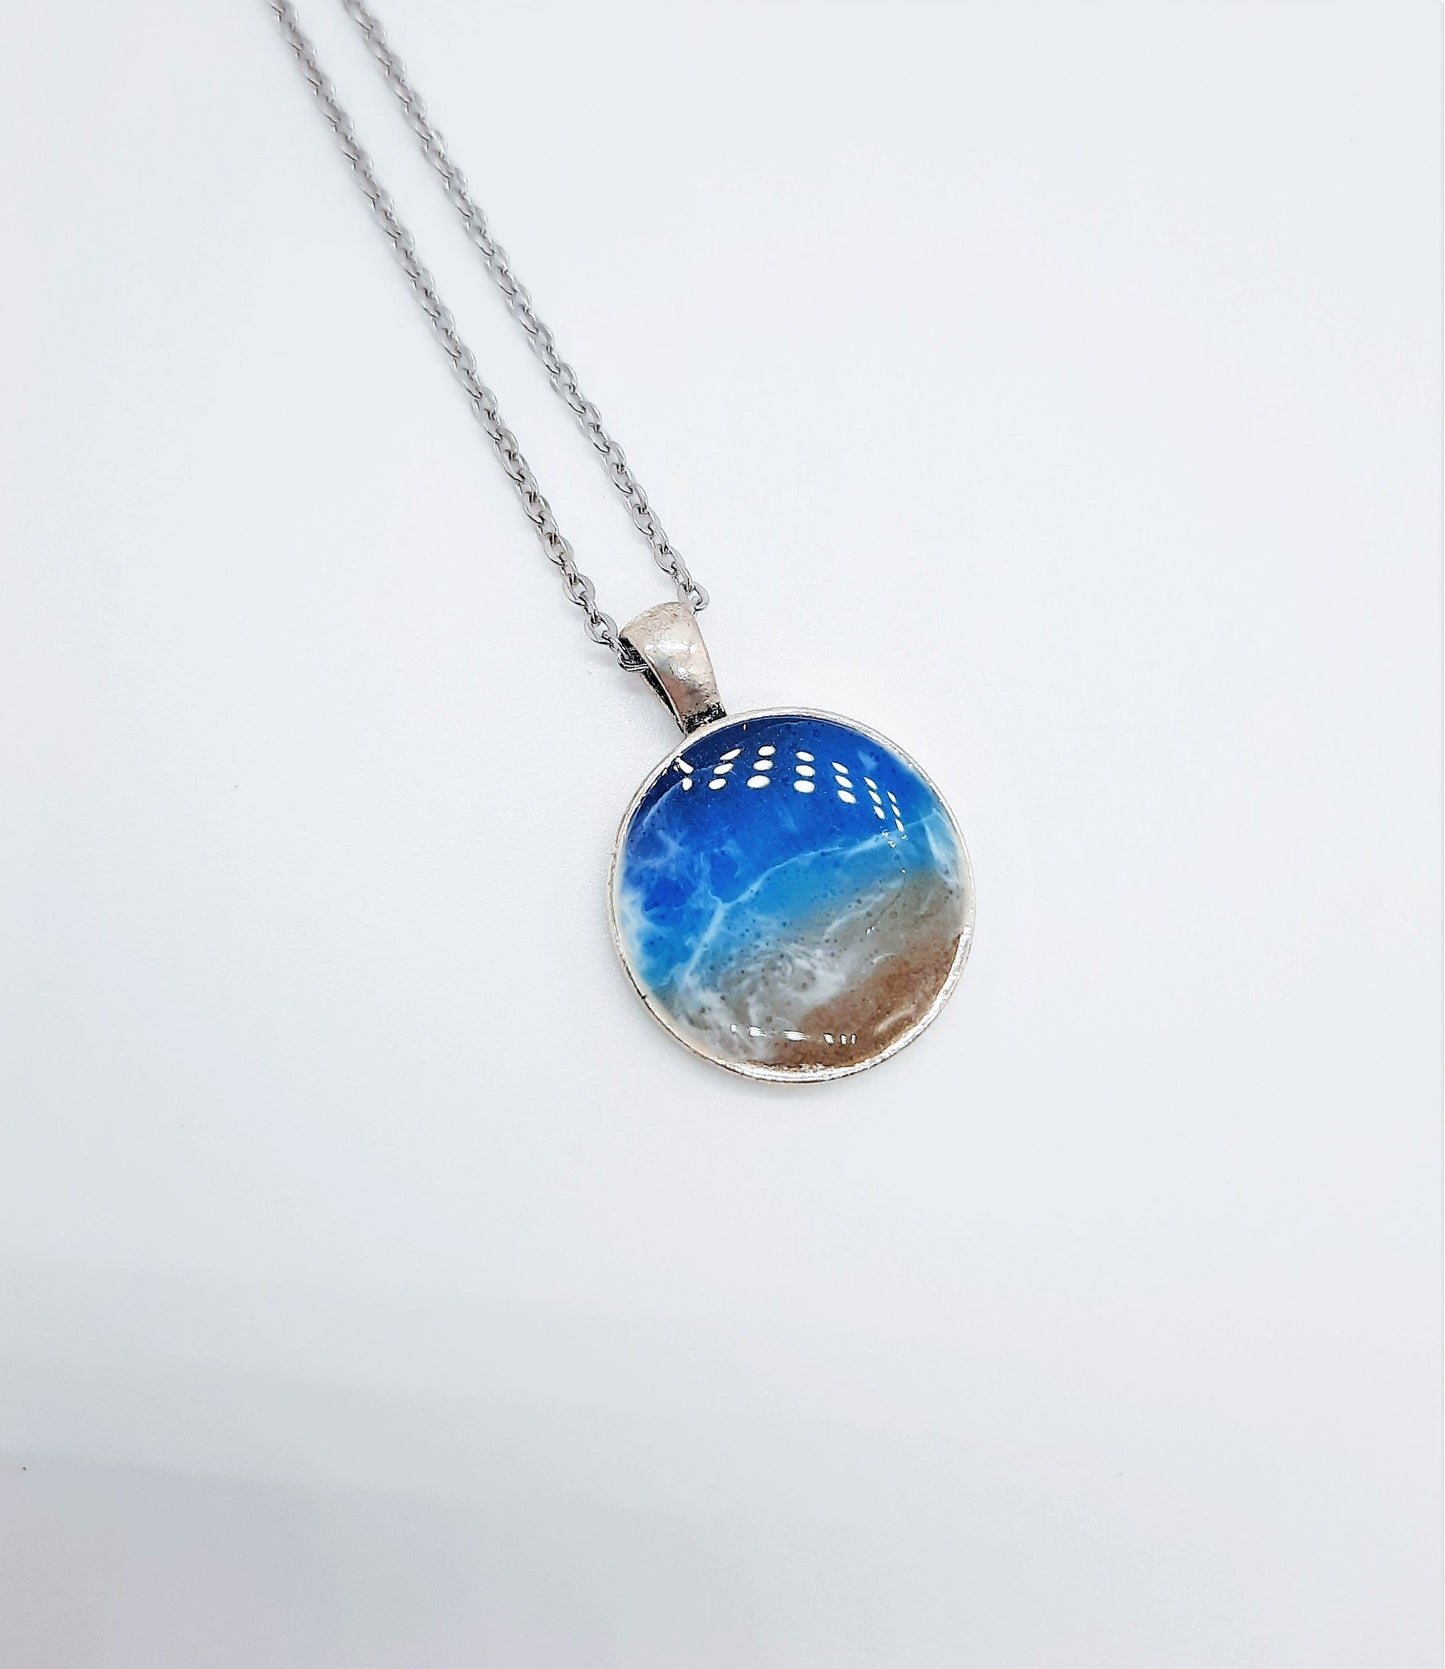 Resin Waves Medium Round Shaped Ocean Pendant / Beach Scene Necklace, Handmade with Resin & Real Sand - One of a Kind - Not a Photograph!